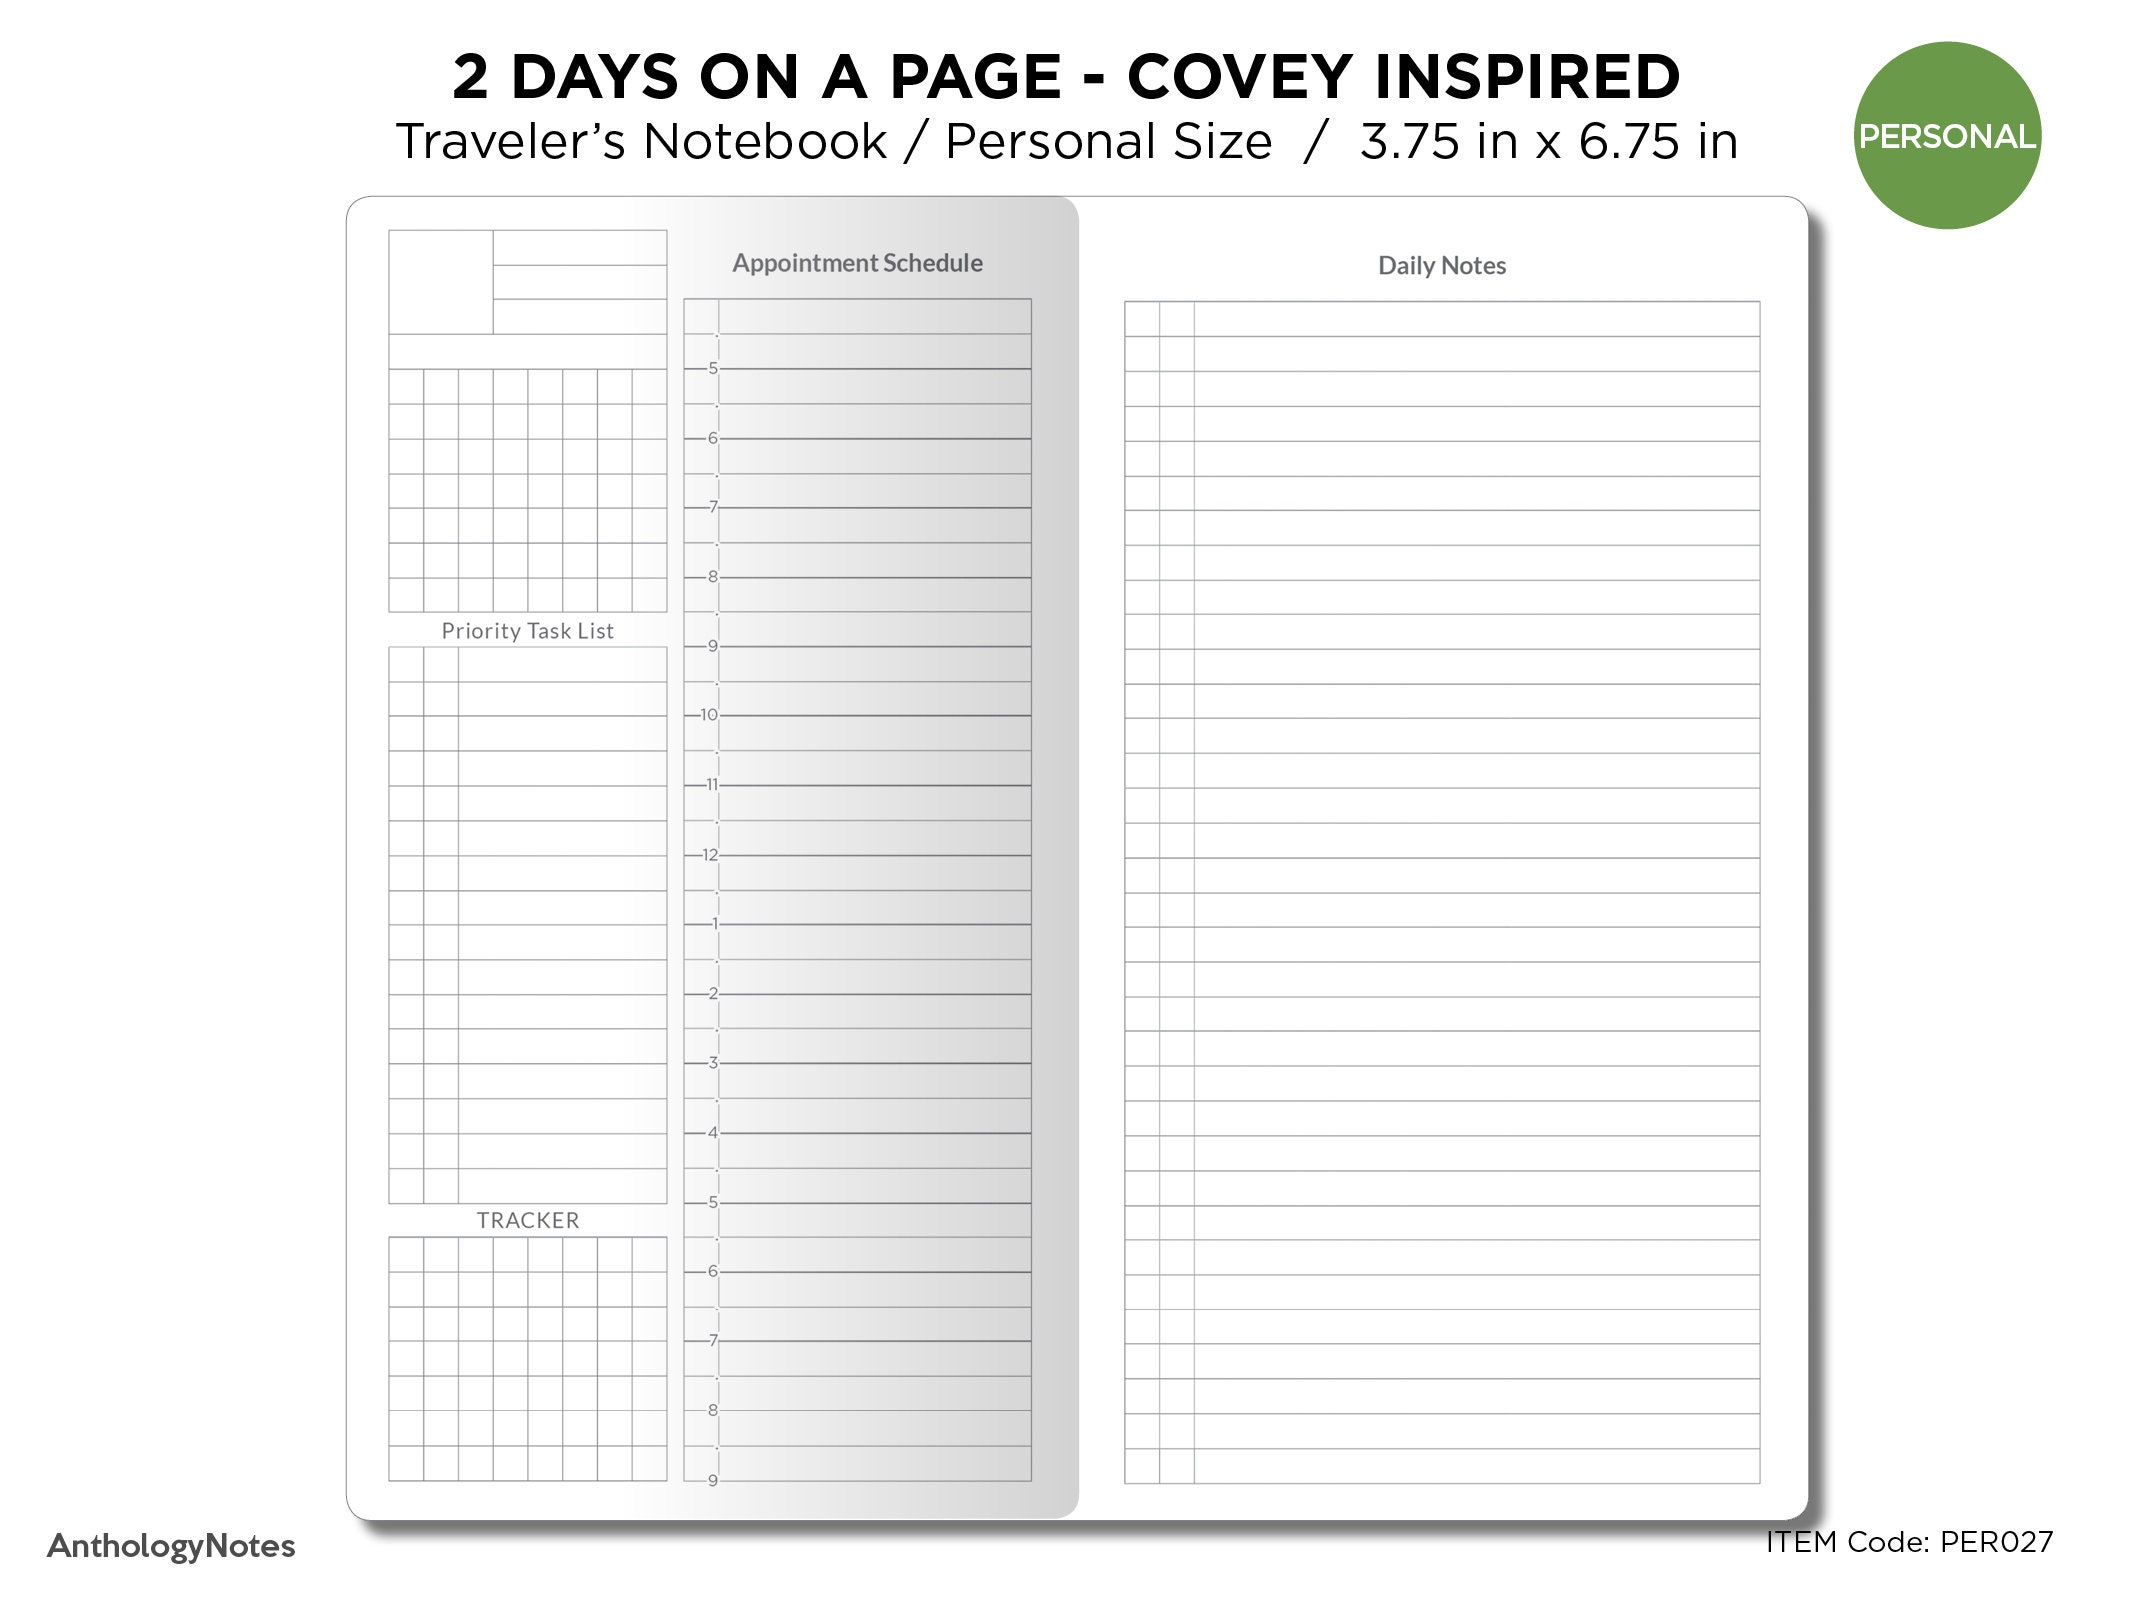 Snb Large Cahier Minimal Vertical 2 Days per Page 2023 / 2024 Printable  Daily Inserts for Traveler's Notebooks 